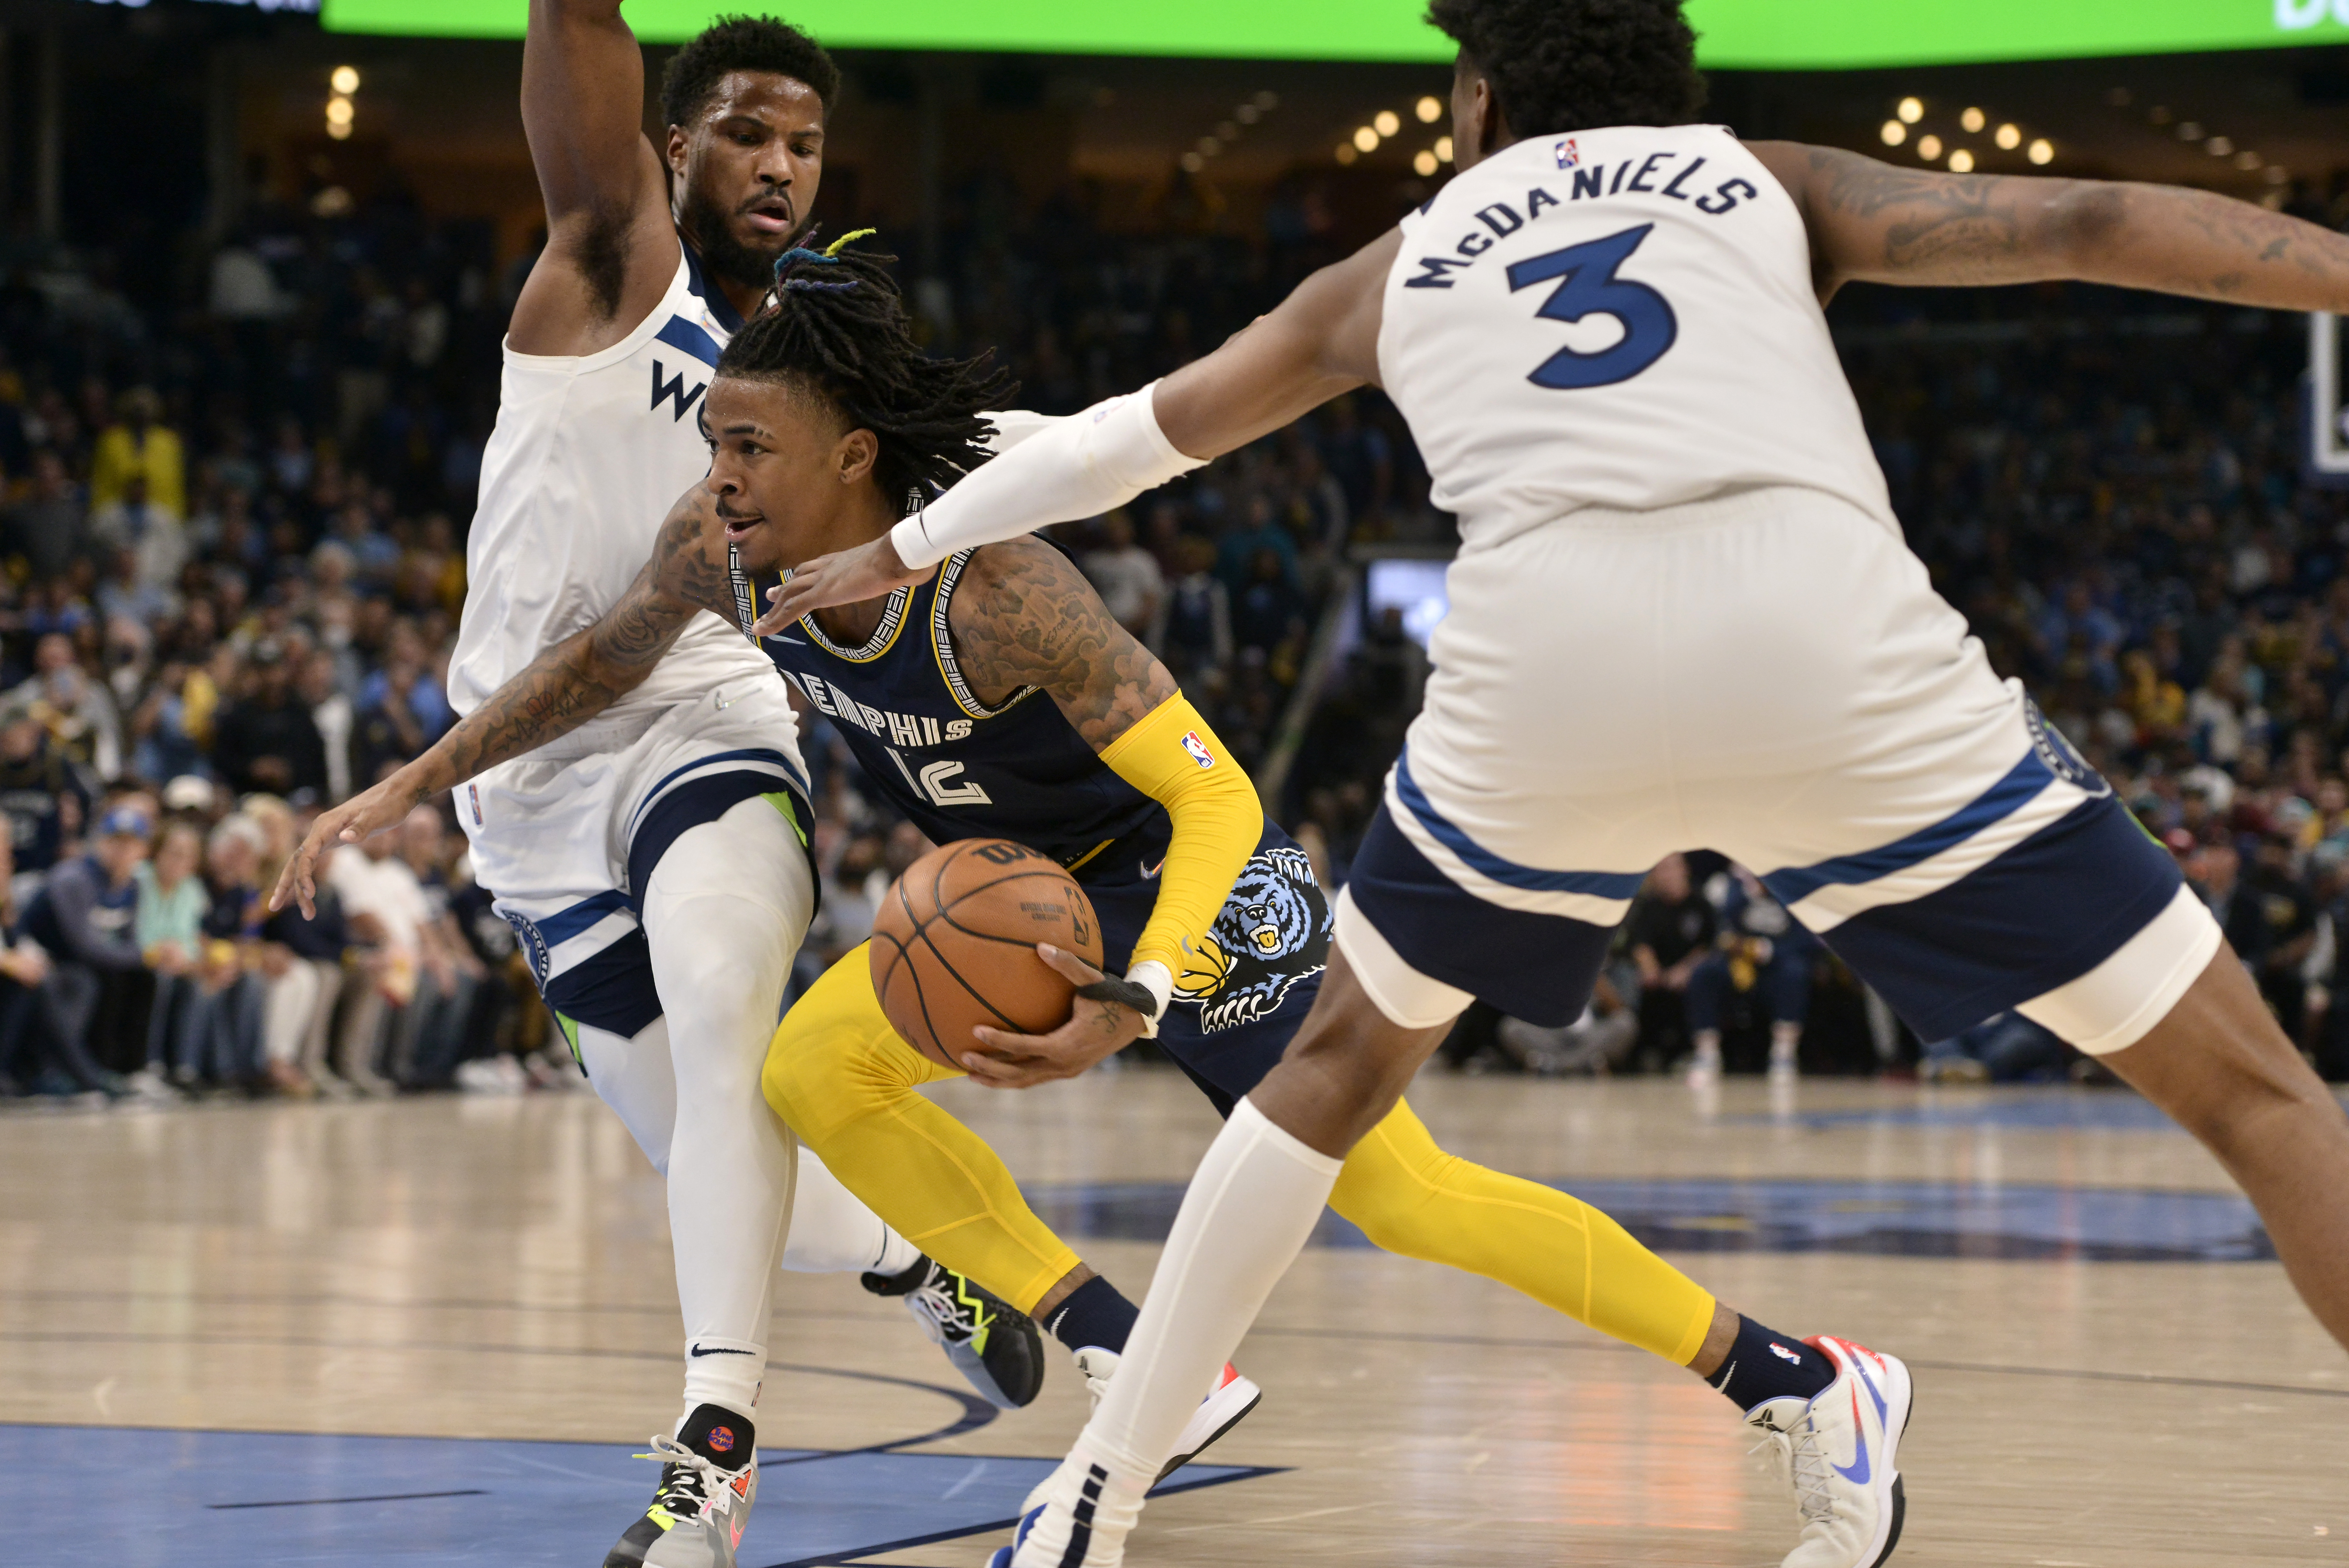 Timberwolves-Grizzlies Game 5 live stream (4/26) How to watch NBA playoffs online, TV, time